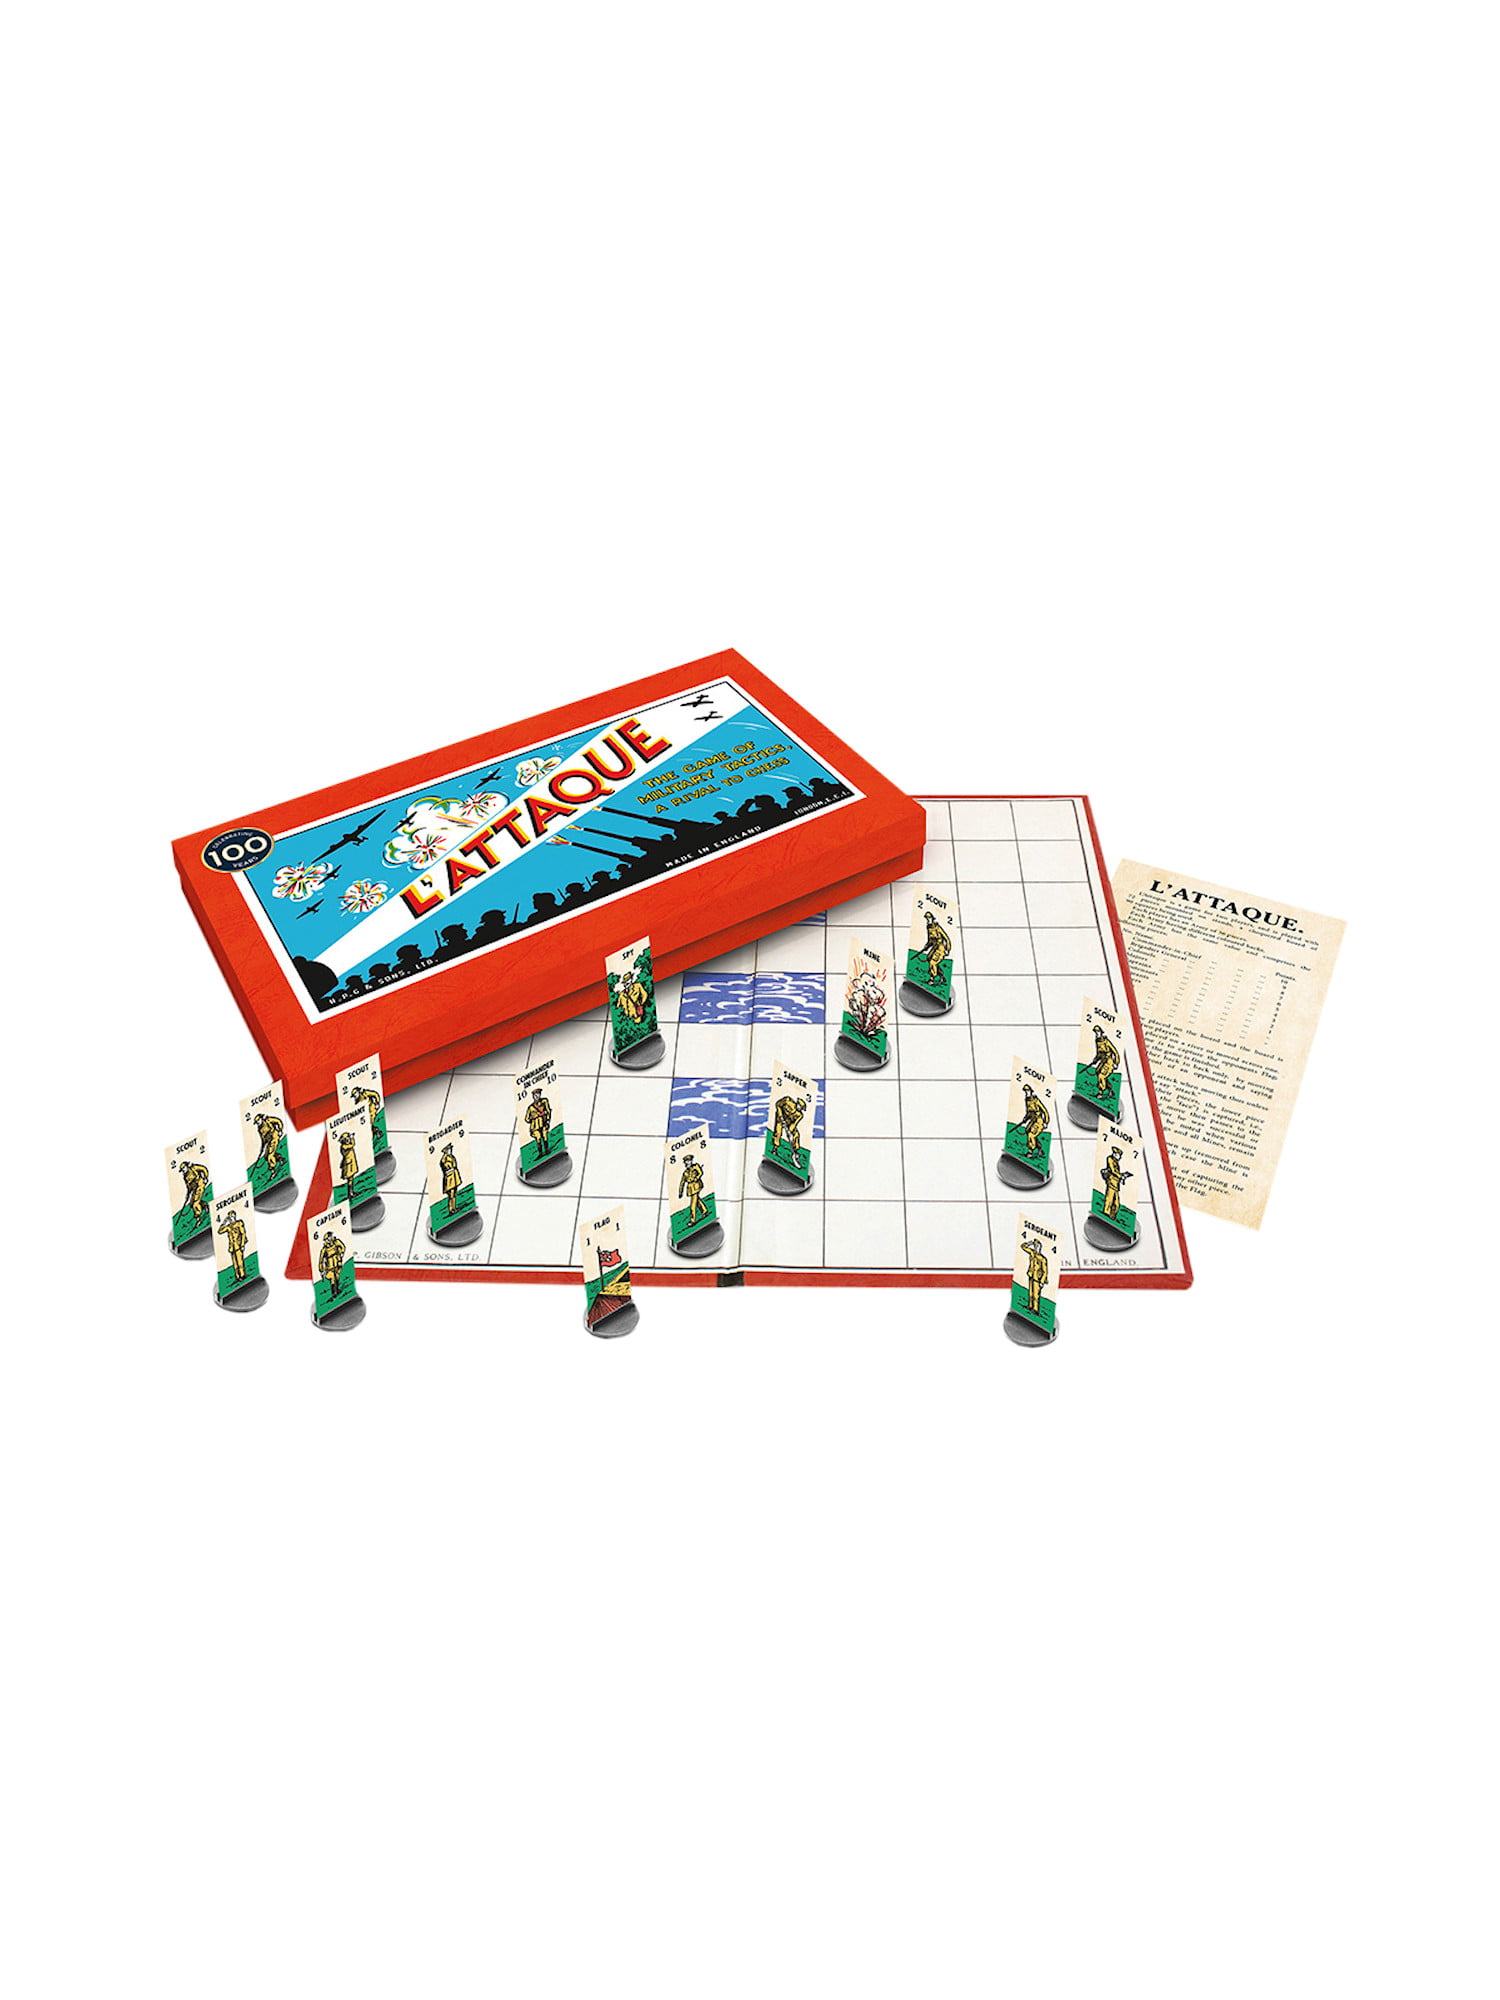 NEW L'Attaque Centenary Edition Family Military Strategy Capture The Flag Game 